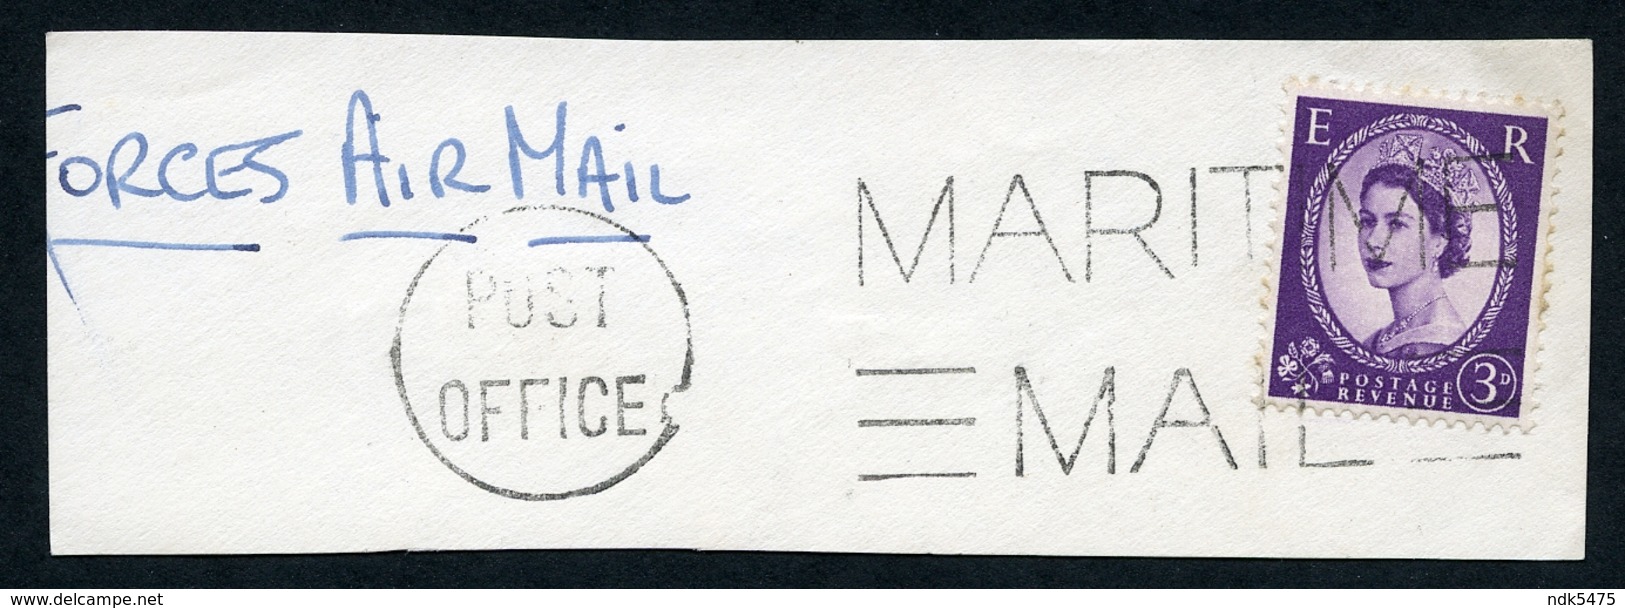 FRANKING - MARITIME MAIL POST OFFICE (MALTA) - Covers & Documents